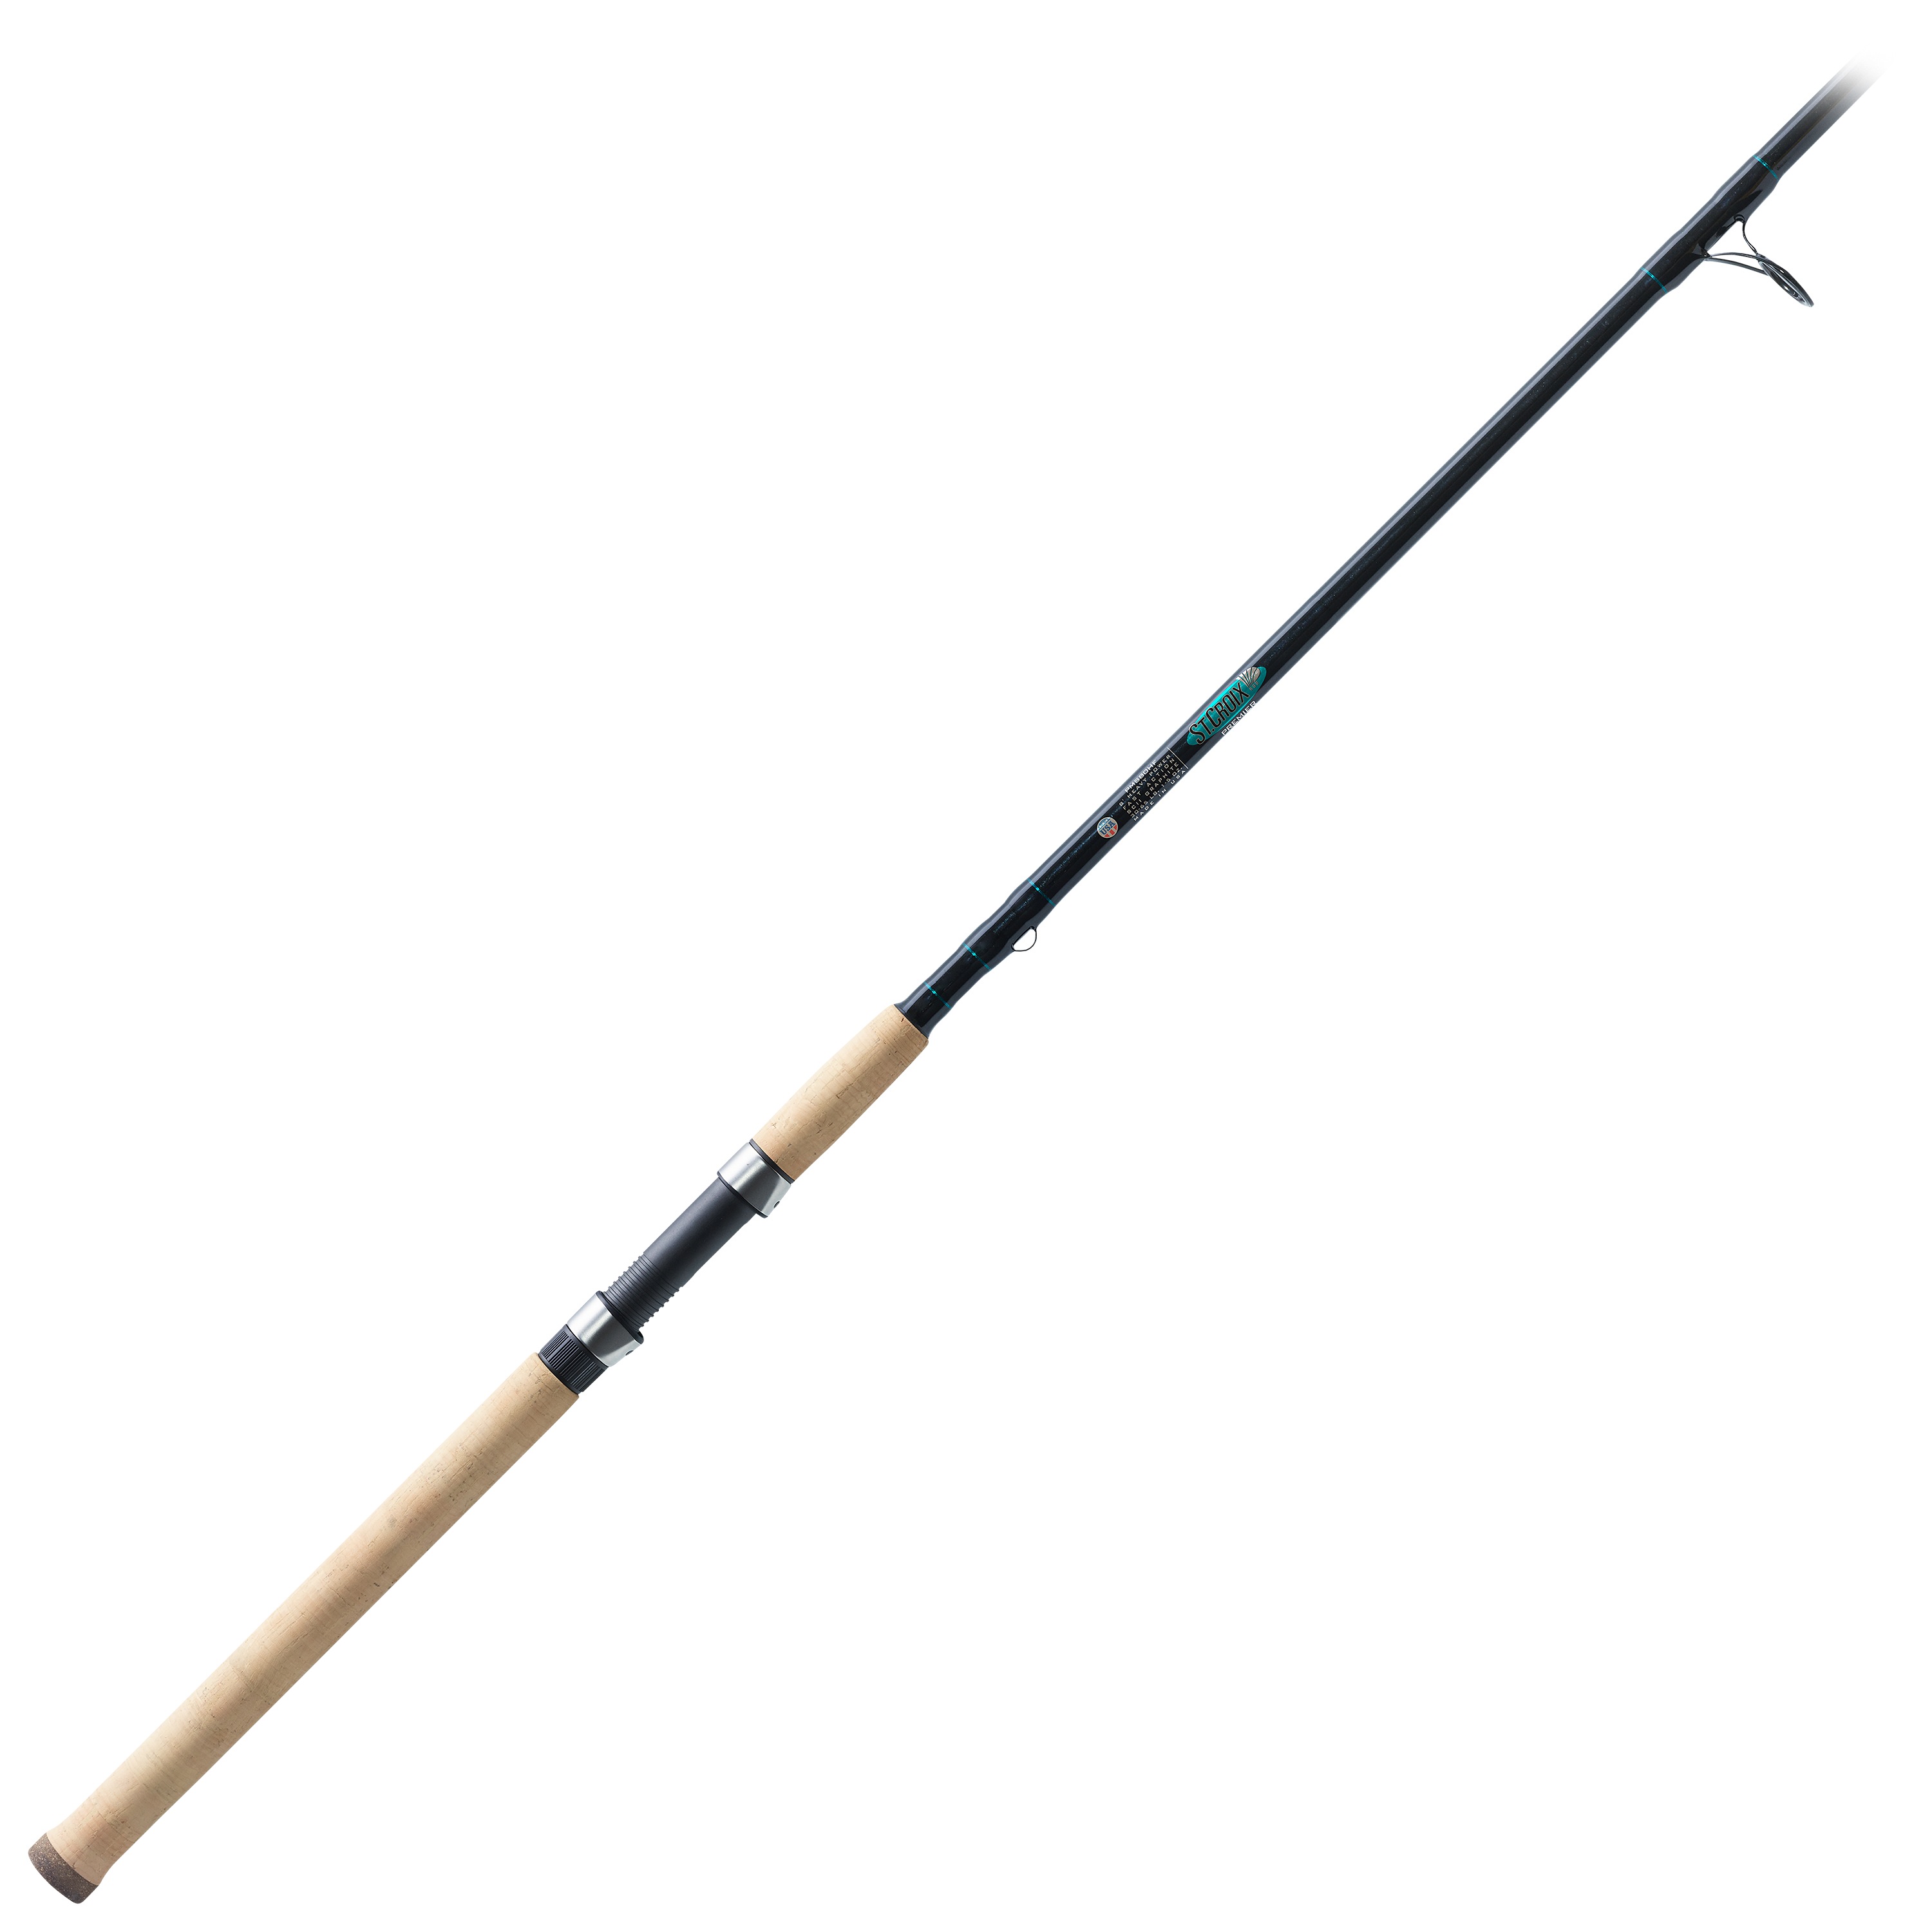 St. Croix Premier Series Musky Spinning Rod